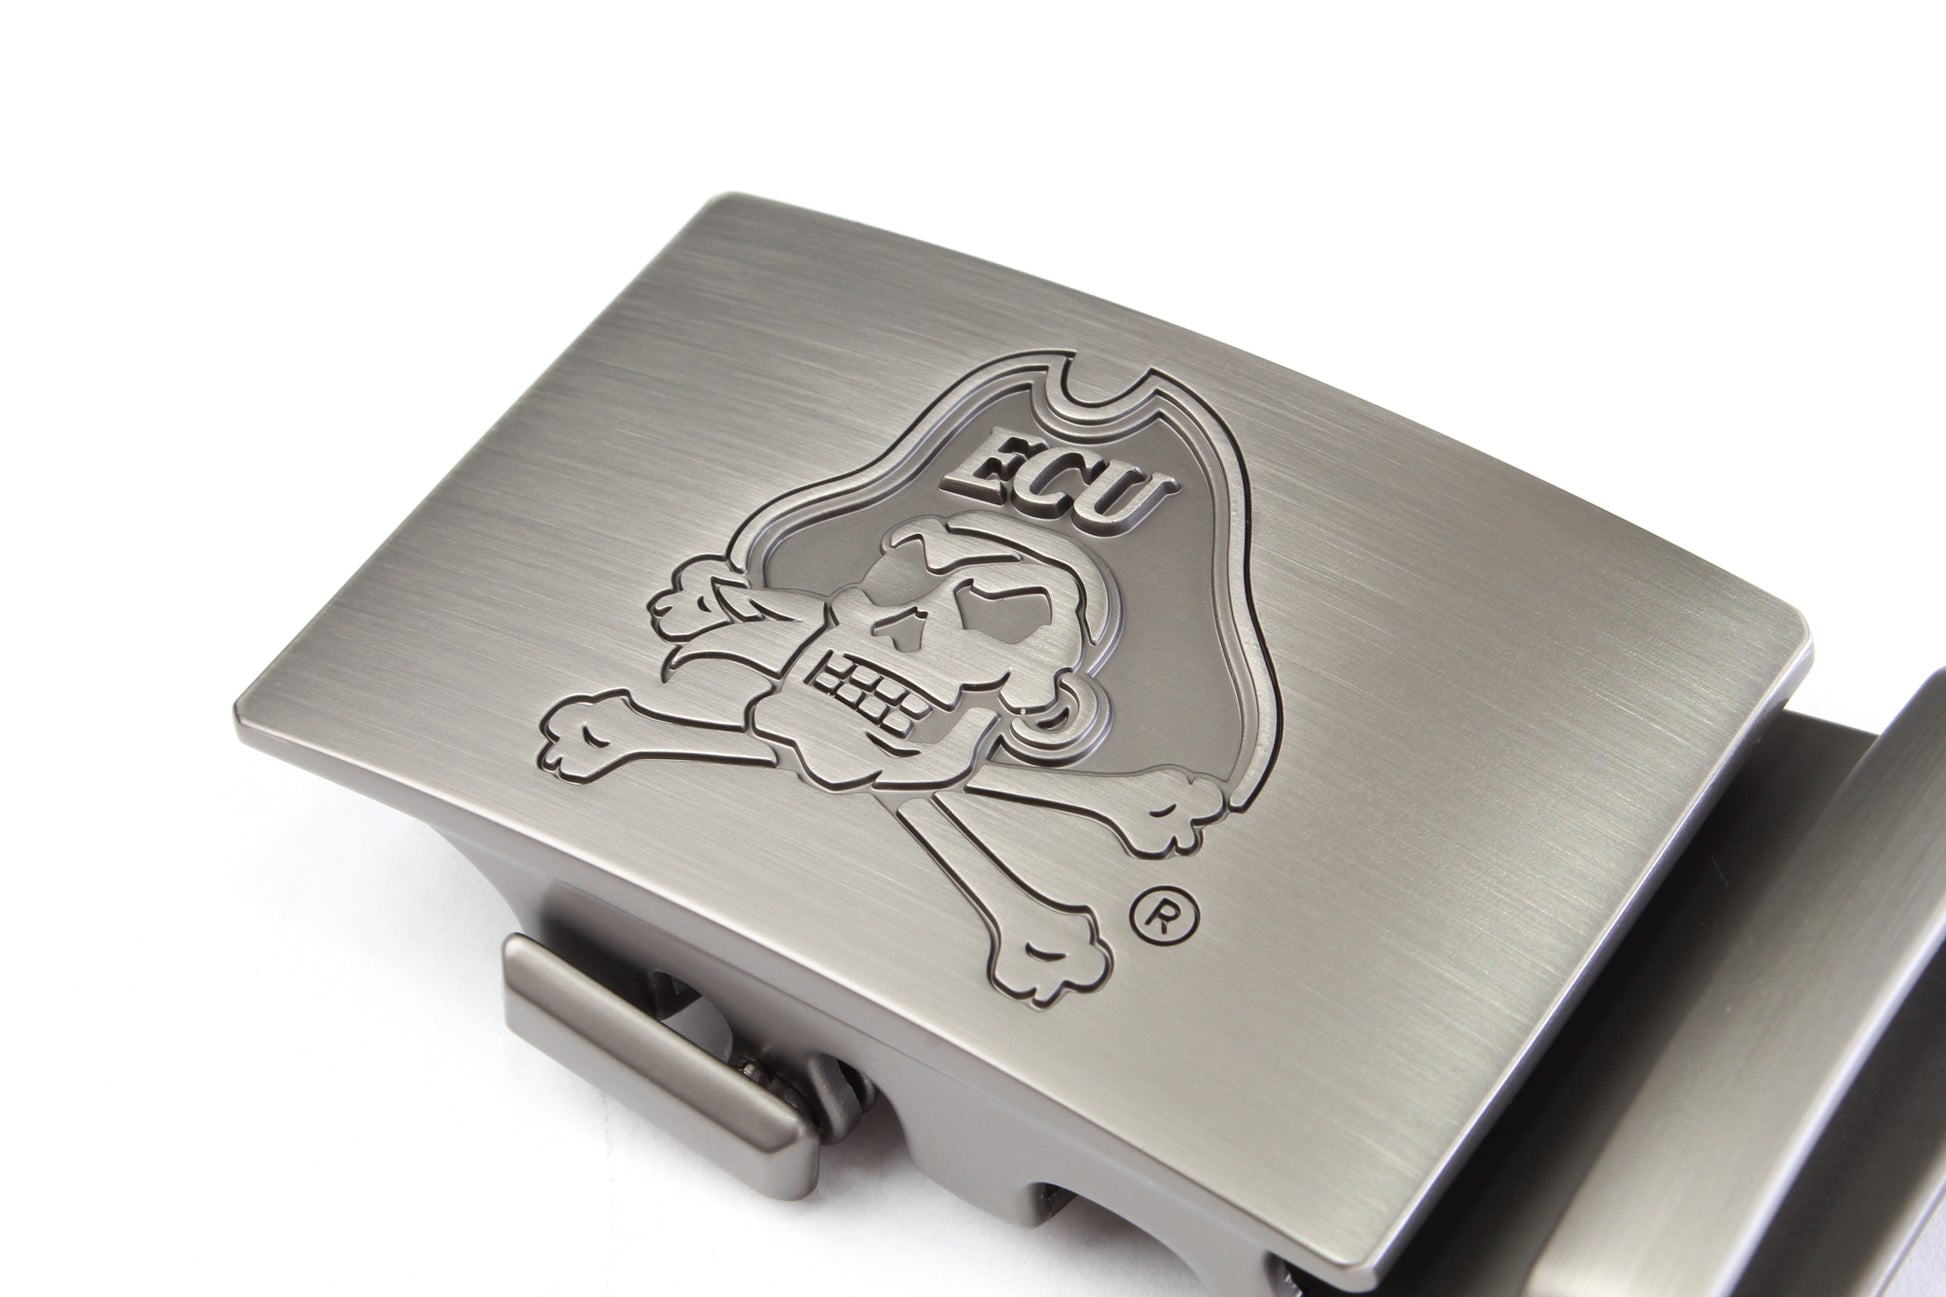 Men's ECU jolly-roger ratchet belt buckle in COLOR with a width of 1.5 inches, oblique view.